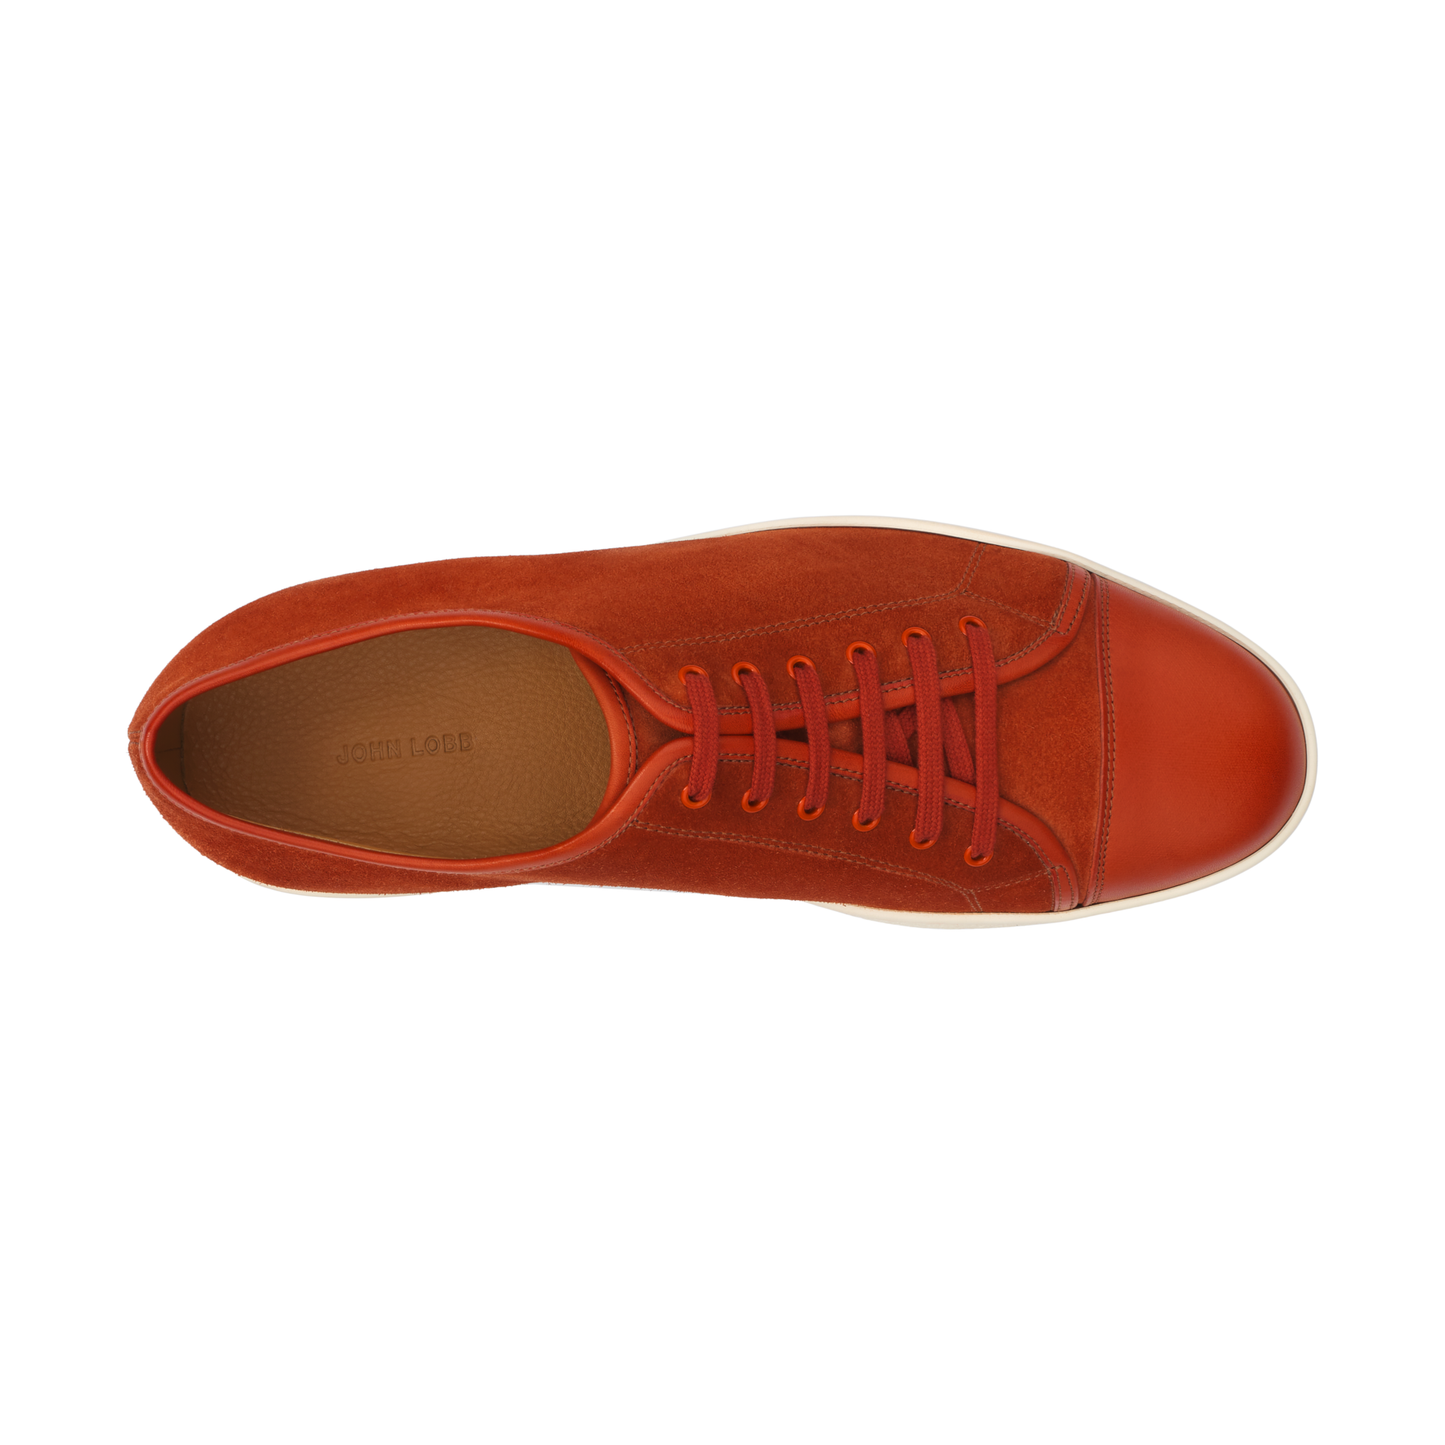 John Lobb "Levah" Suede and Leather Sneakers in Brick Red - SARTALE